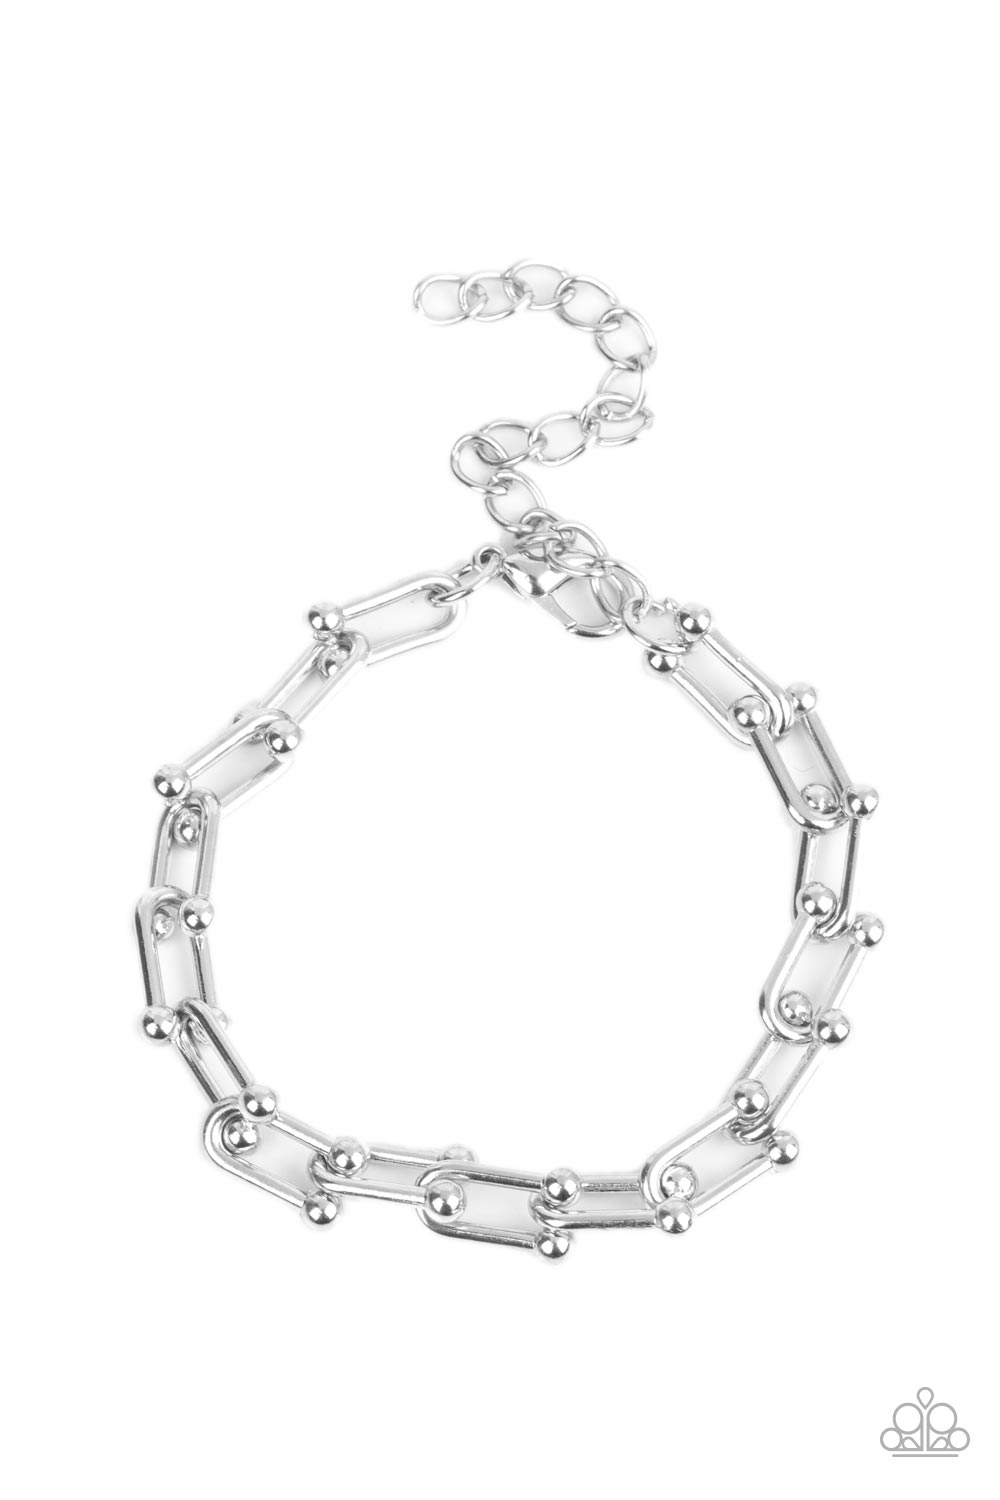 GRT Jewellers - This sleek-silver bracelet will be a... | Facebook